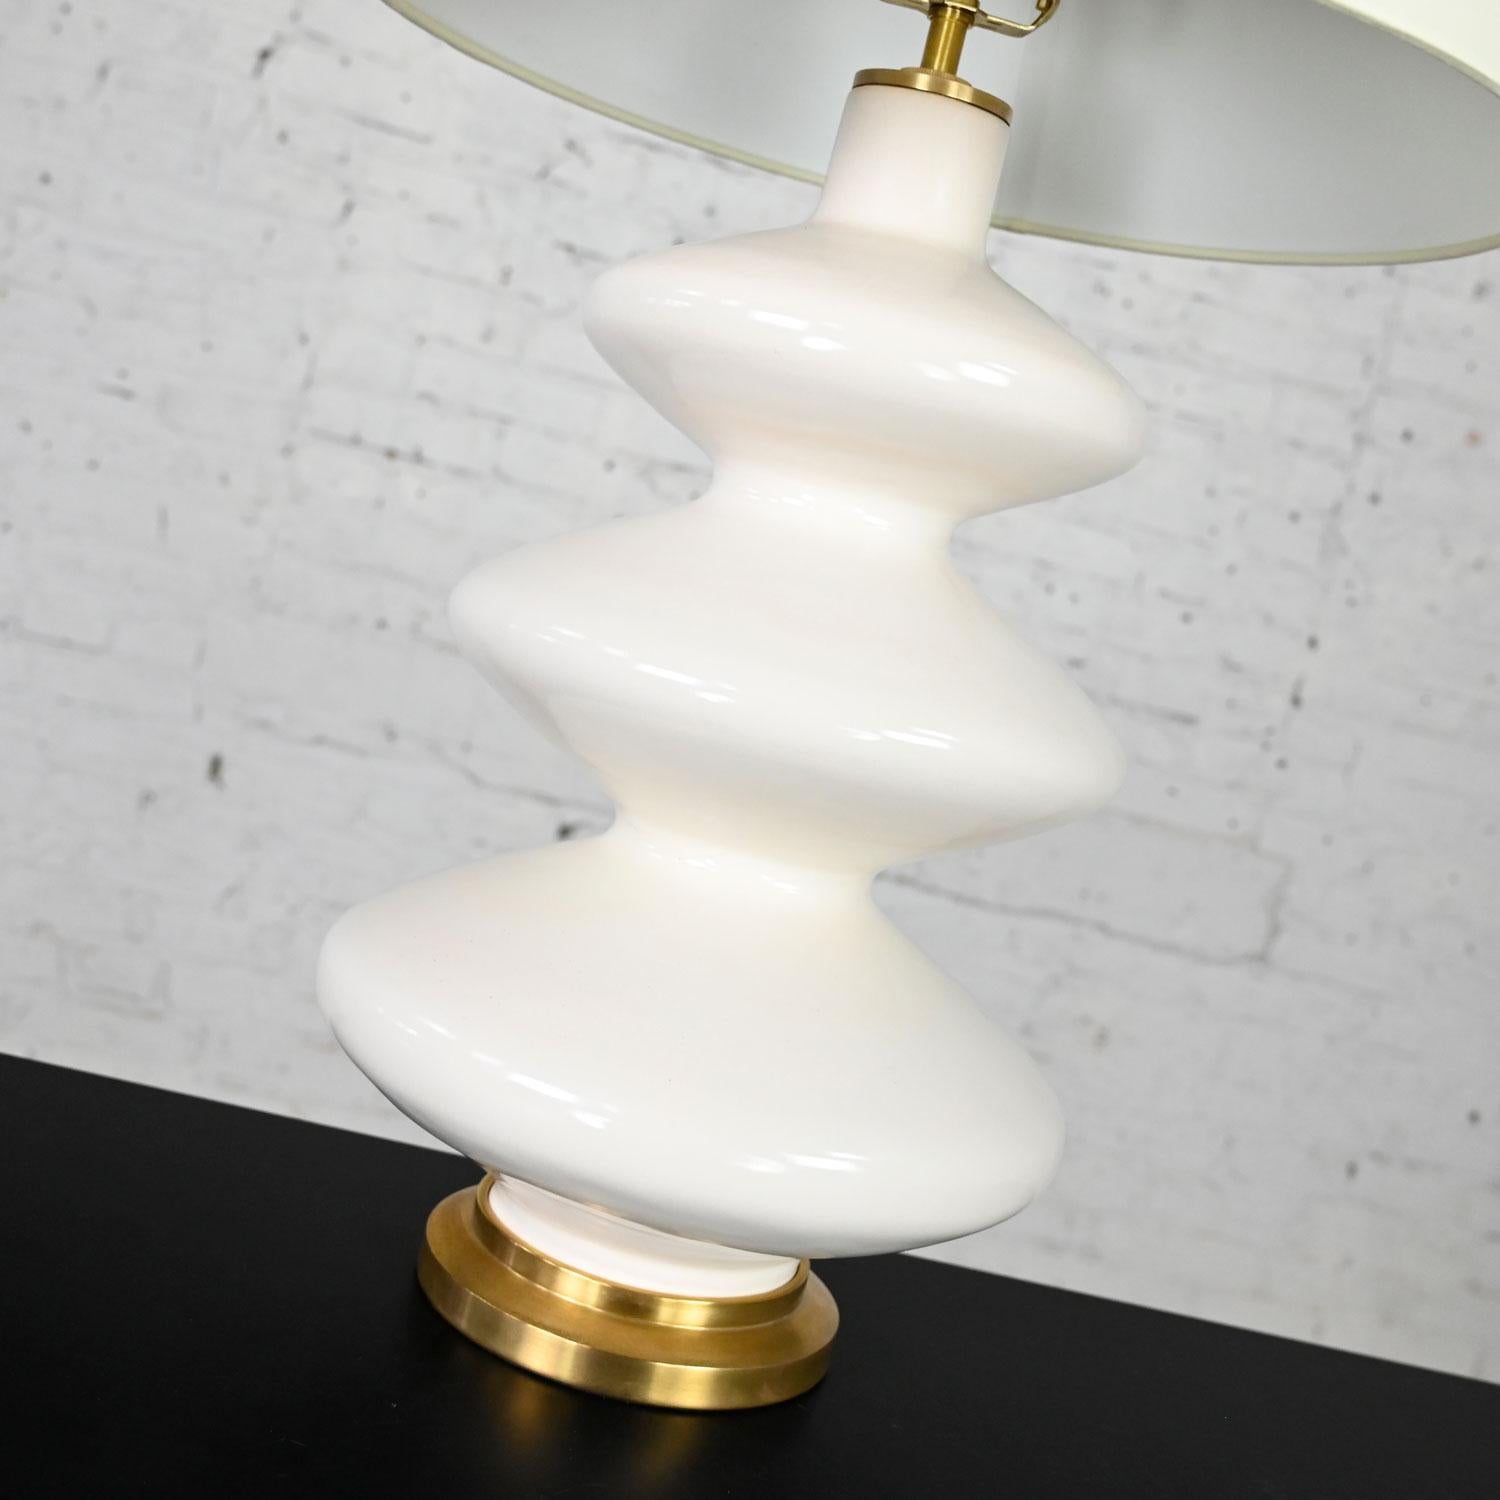 Smith Ivory Table Lamp Brass Details Christopher Spitzmiller for Visual Comfort 1